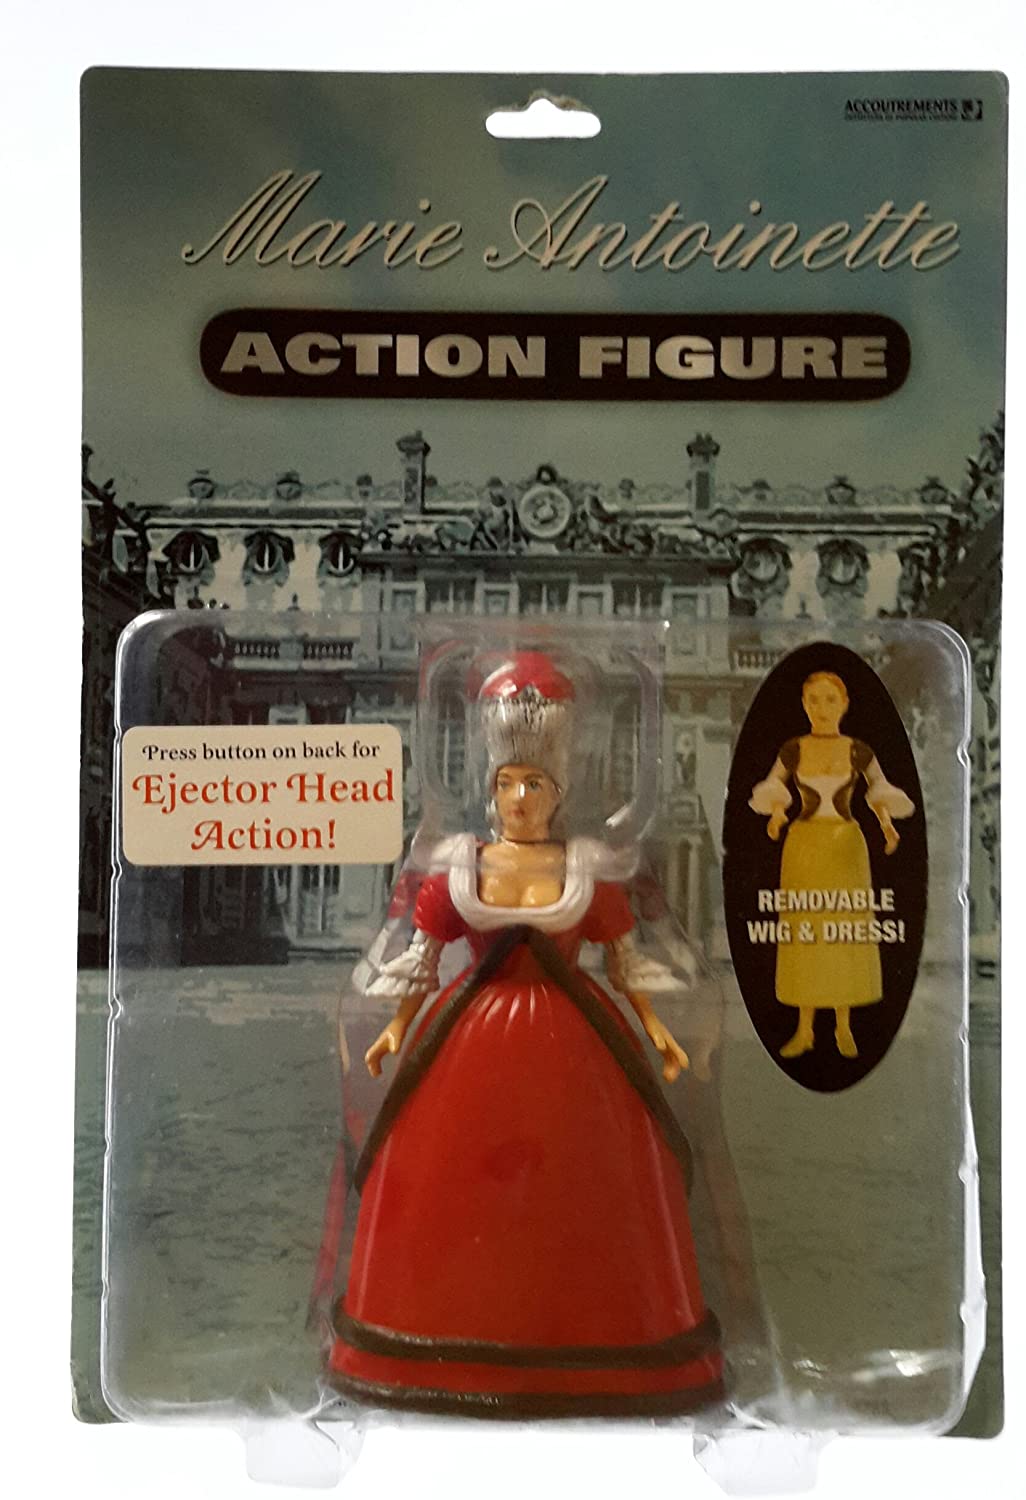 MARIE ANTOINETTE ACTION FIGURE - ACCOUTREMENTS-DENTED BOX